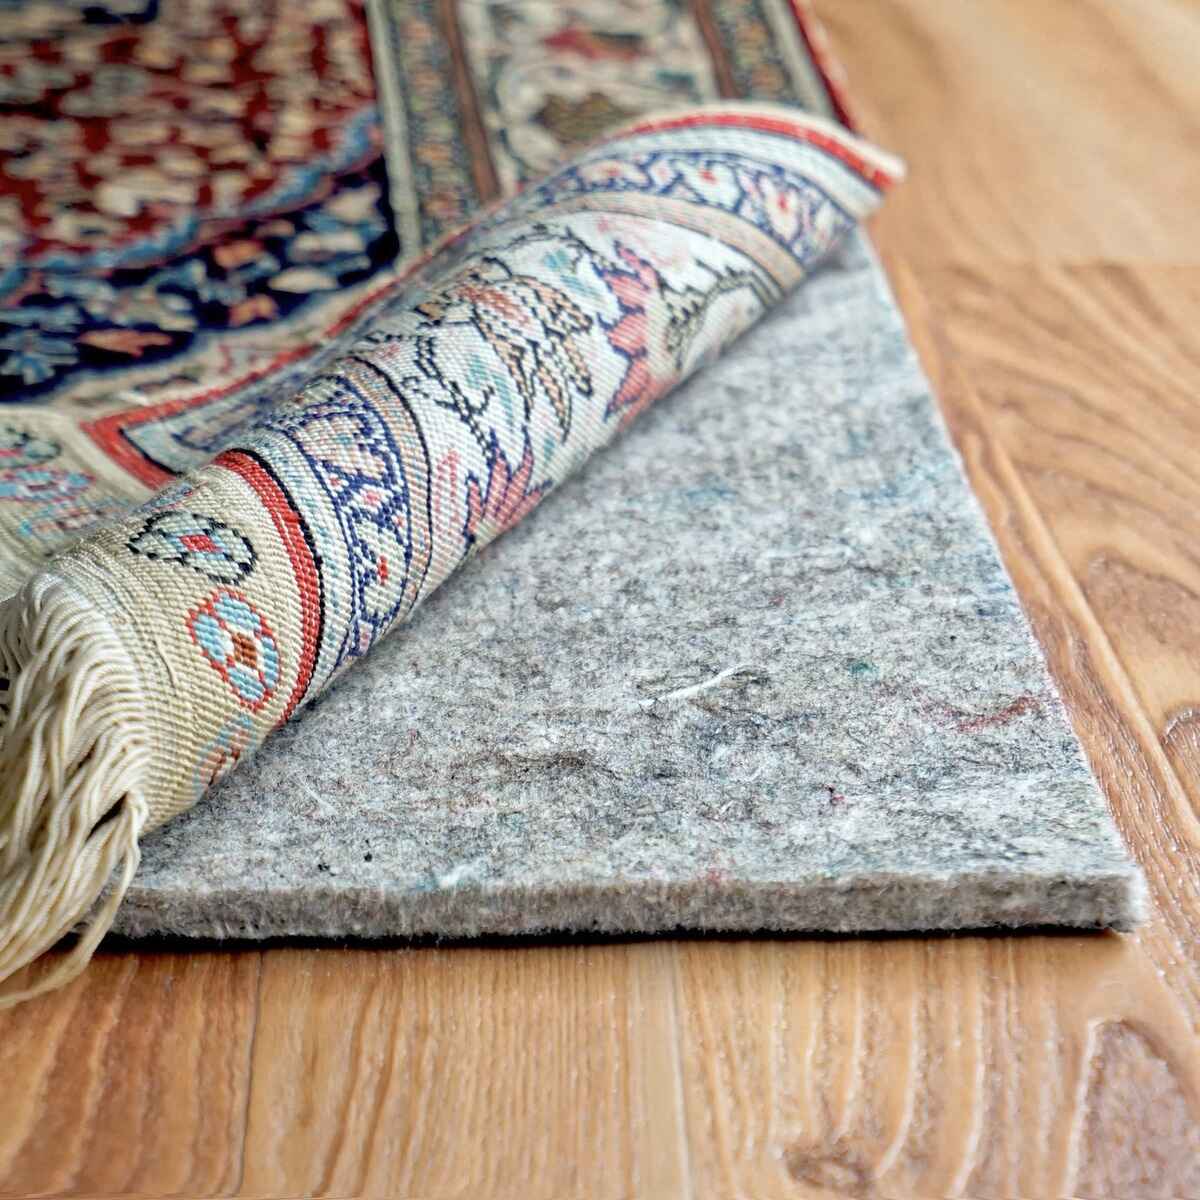 How To Keep Area Rug From Bunching Up On Carpet, by Hiyassermiopa